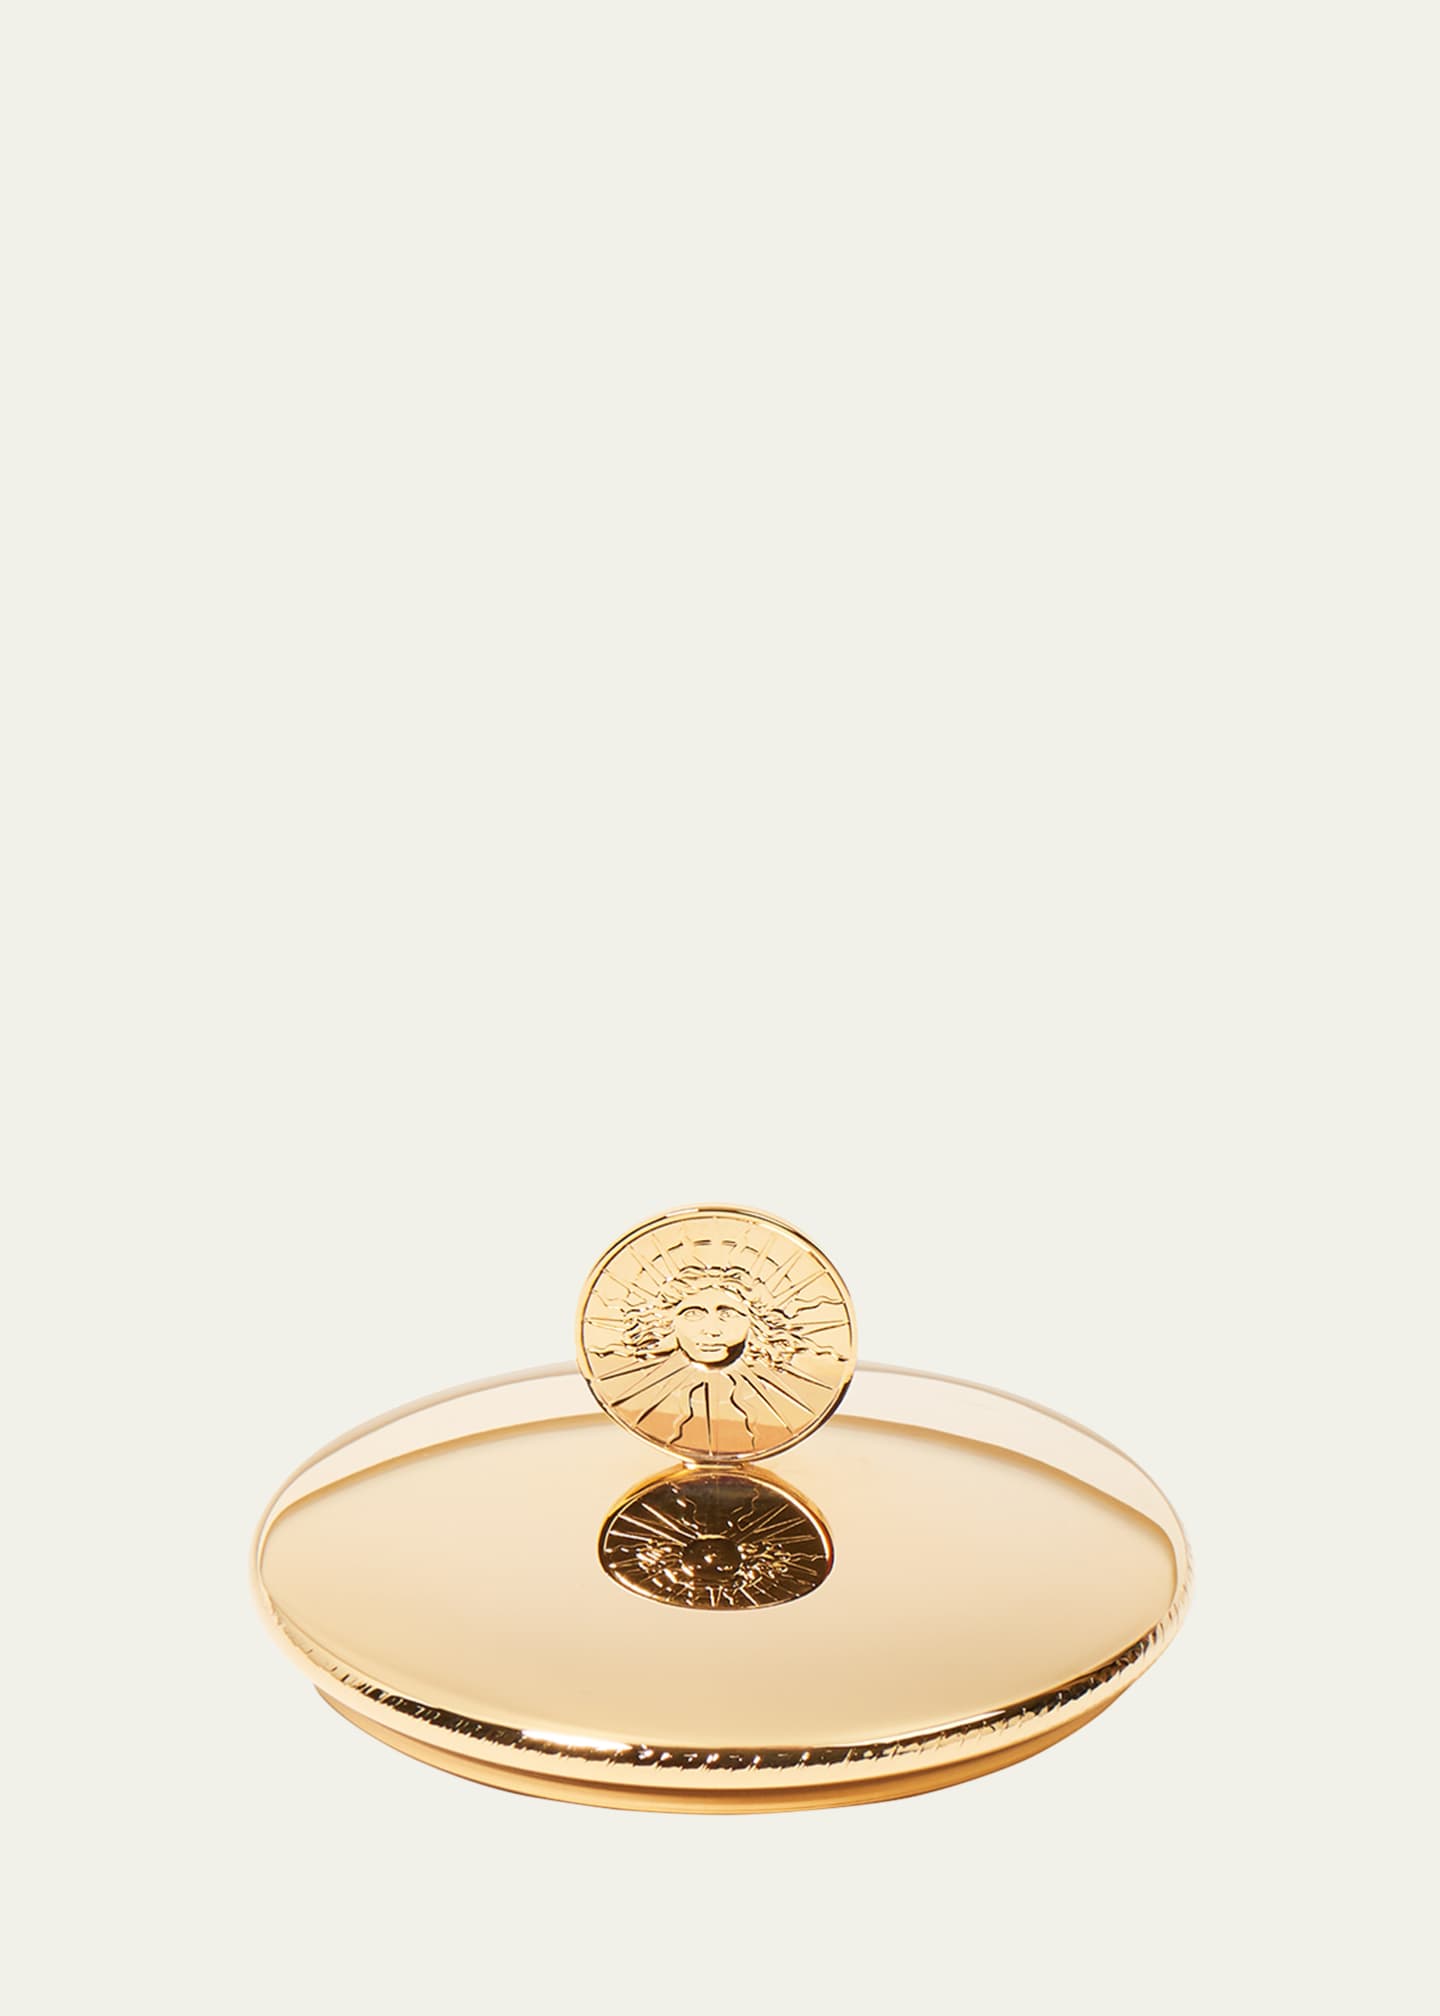 Trudon Brass Lid for Candle, 270 g - Bergdorf Goodman